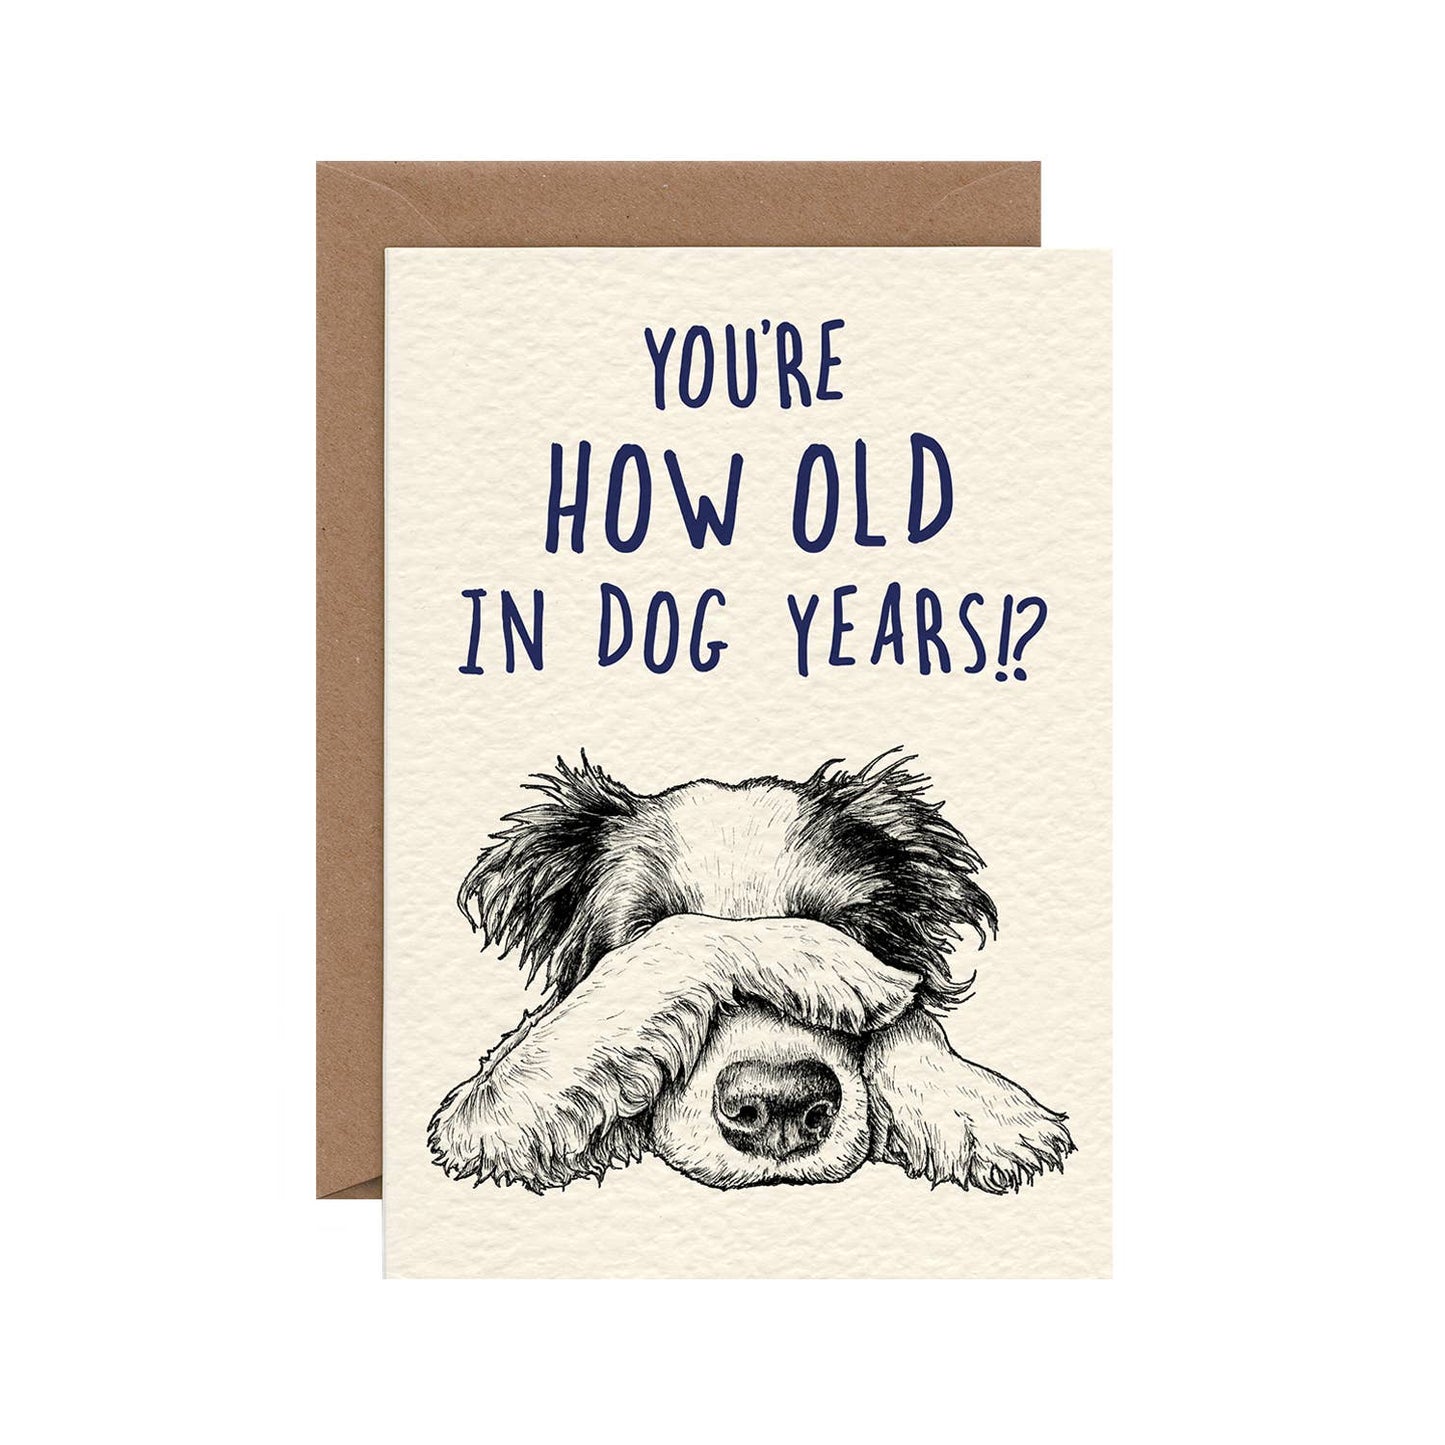 You're How Old in Dog Years?